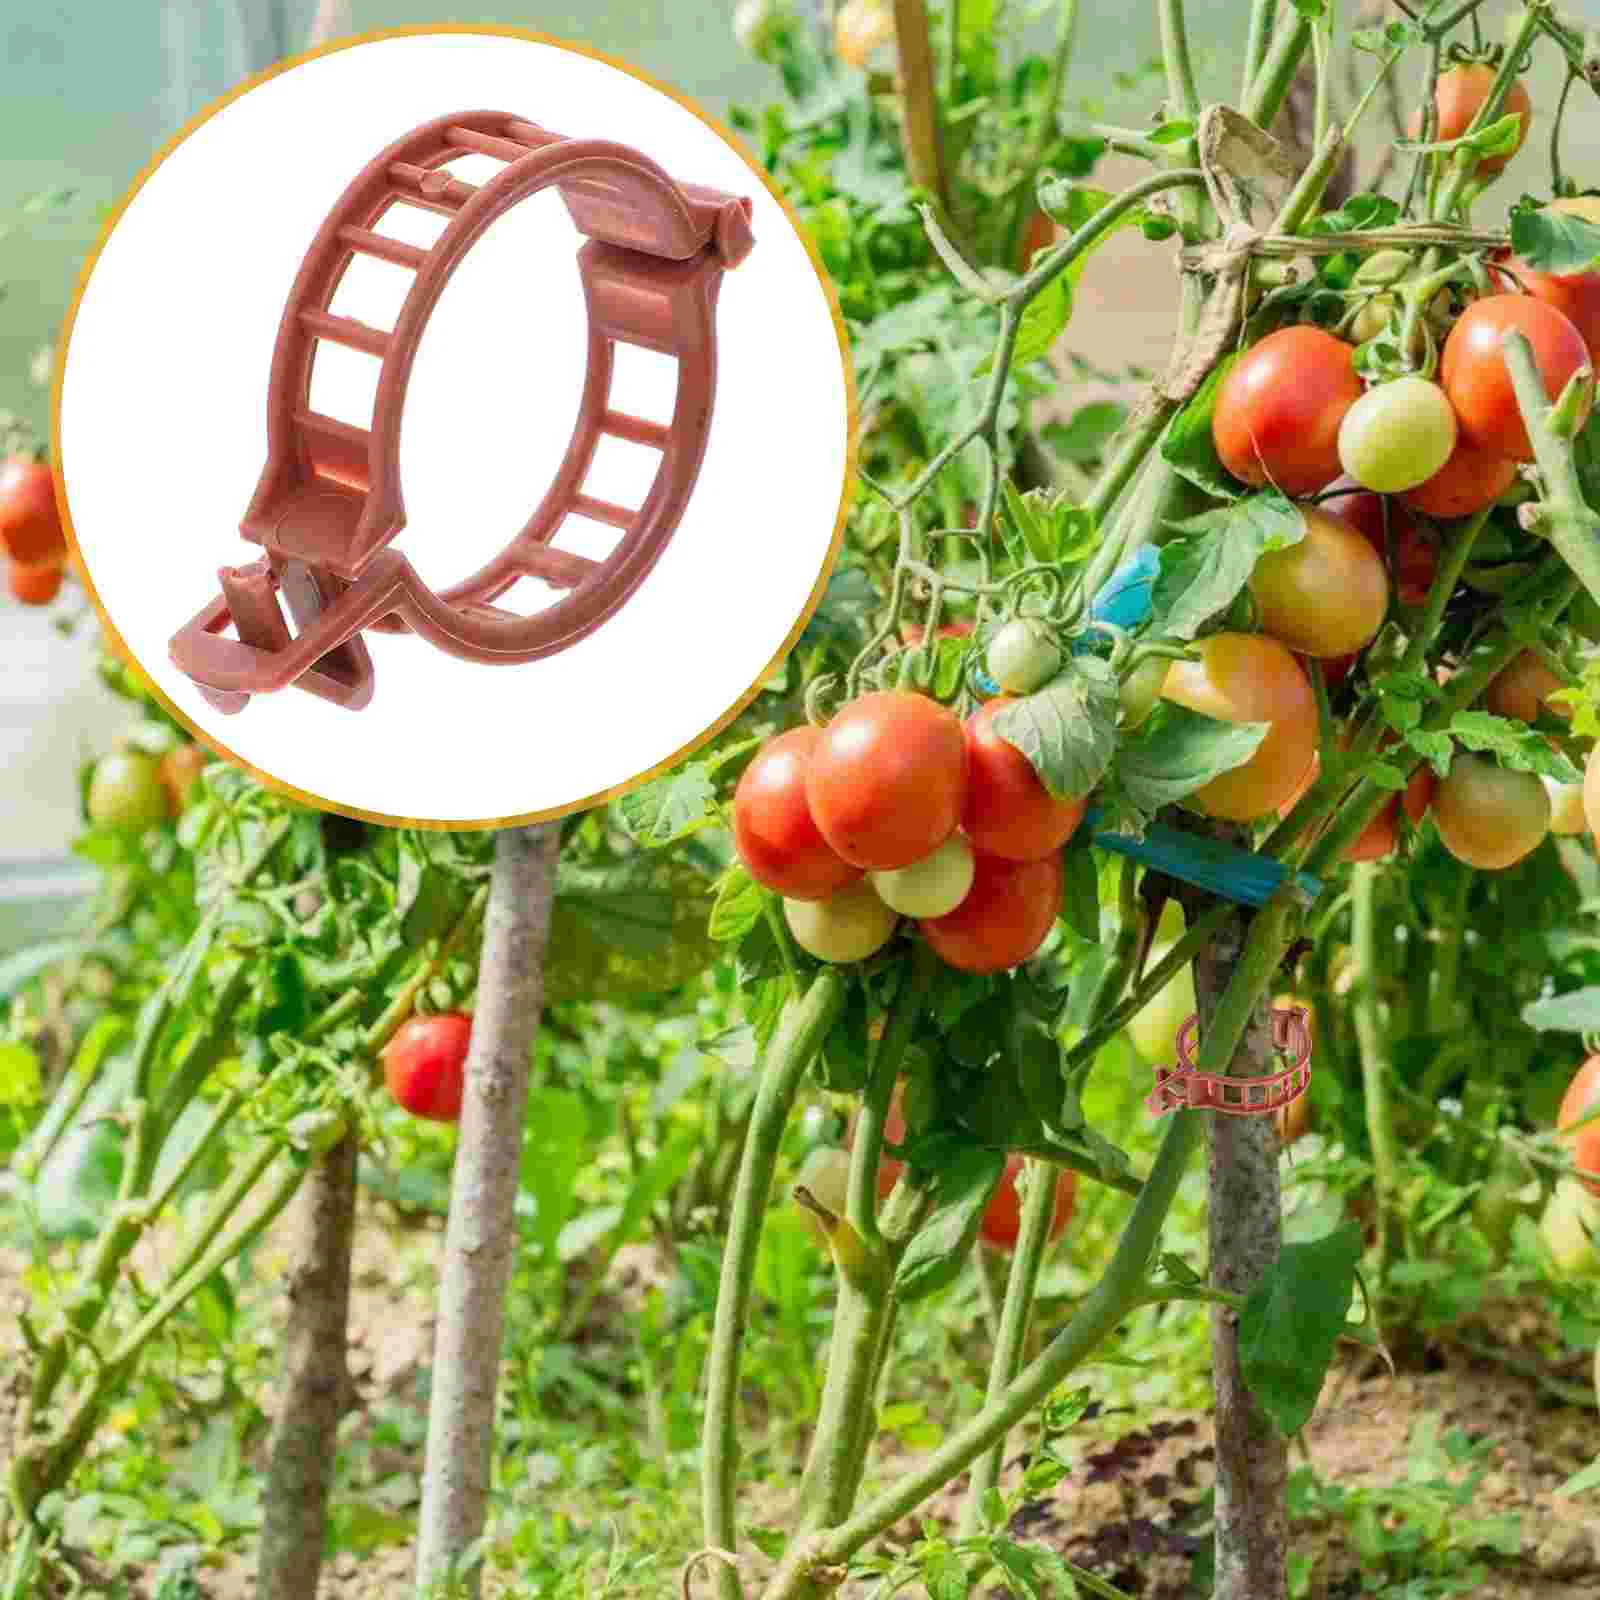 

Clips Gardening Support Greenhouse Supports Plastic Tomato Vine Fixing Stem Flower